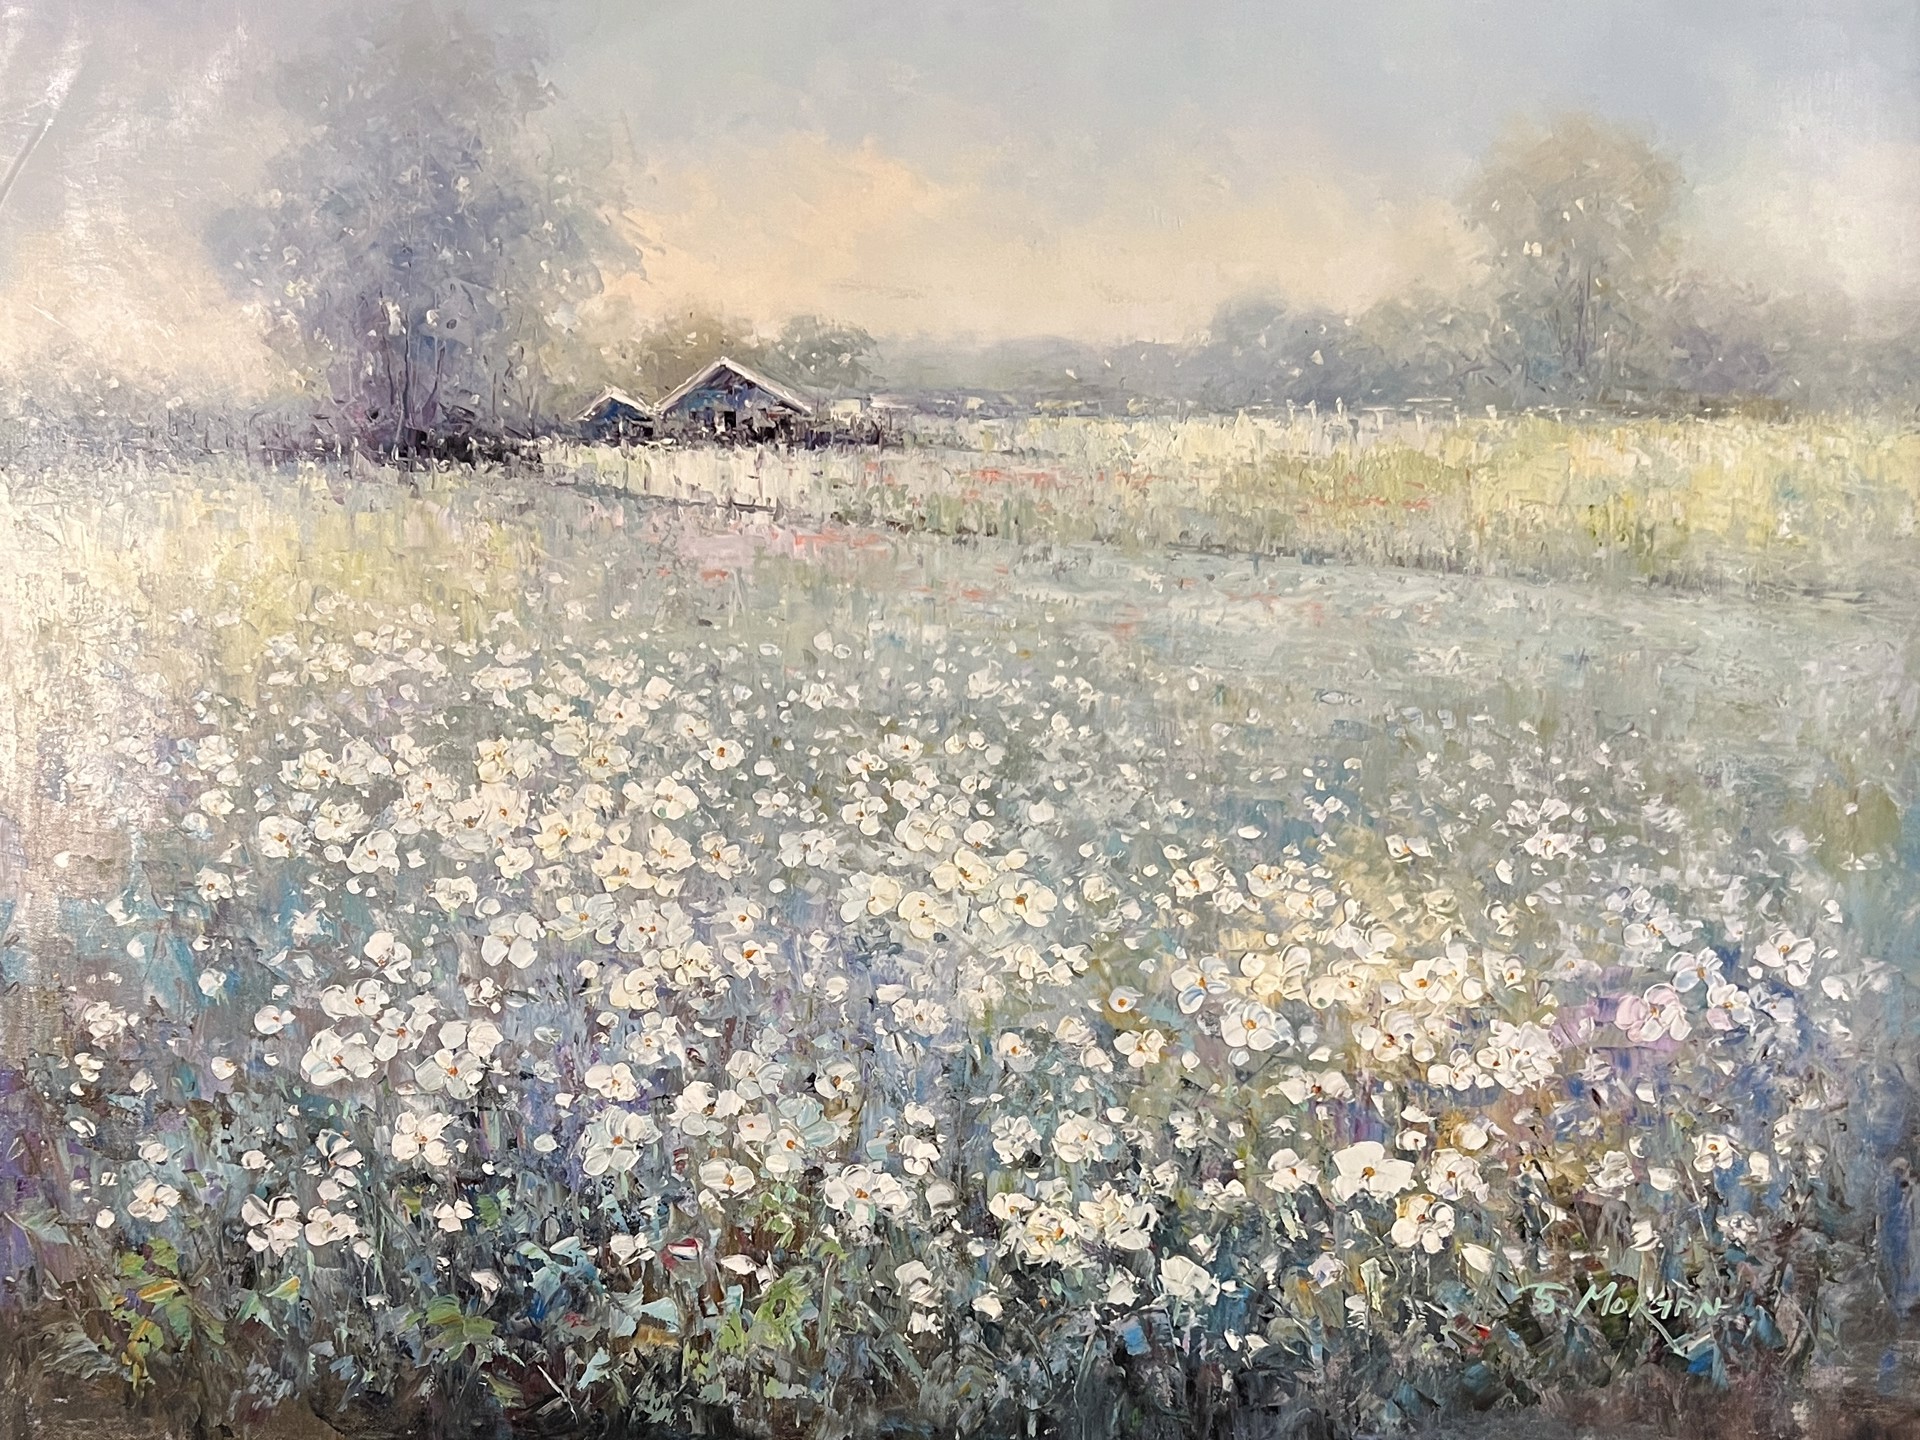 MEADOW BY THE BARNS by J MORGAN